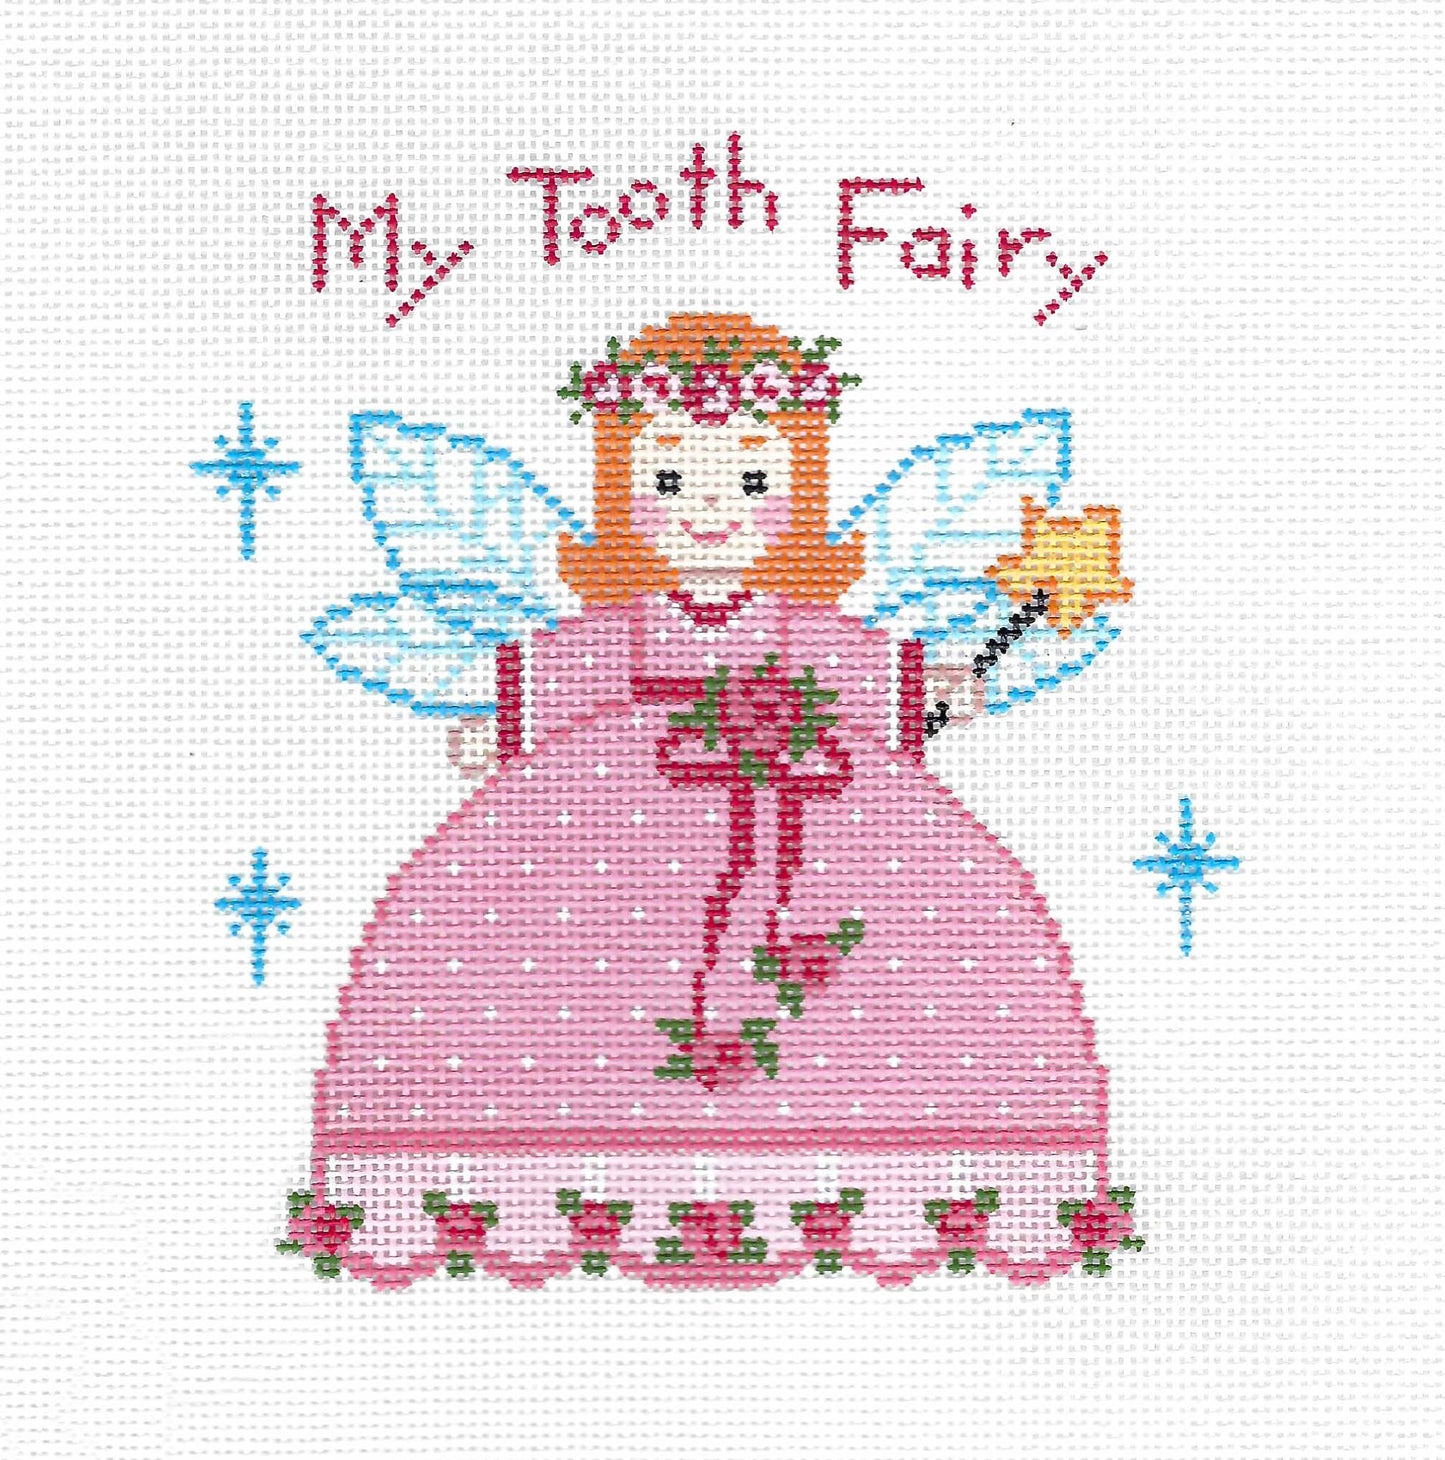 Tooth Fairy Canvas ~ TOOTH FAIRY Pillow Princess Girl's handpainted Needlepoint Canvas on 18 Mesh by LEE